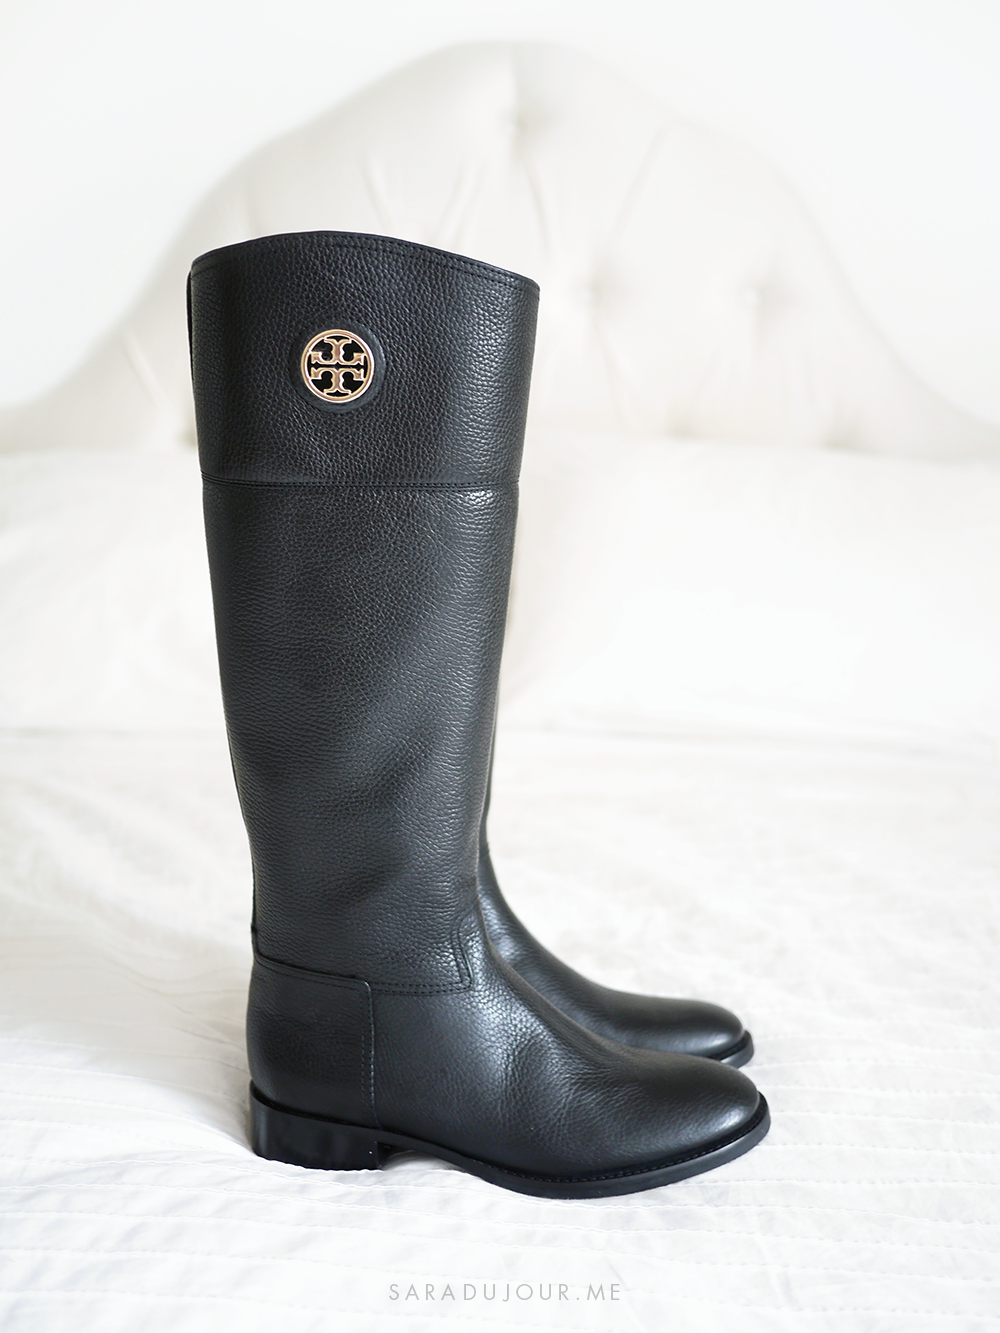 Tory Burch Junction Riding Boots - Boot and Shoe Haul |Sara du Jour